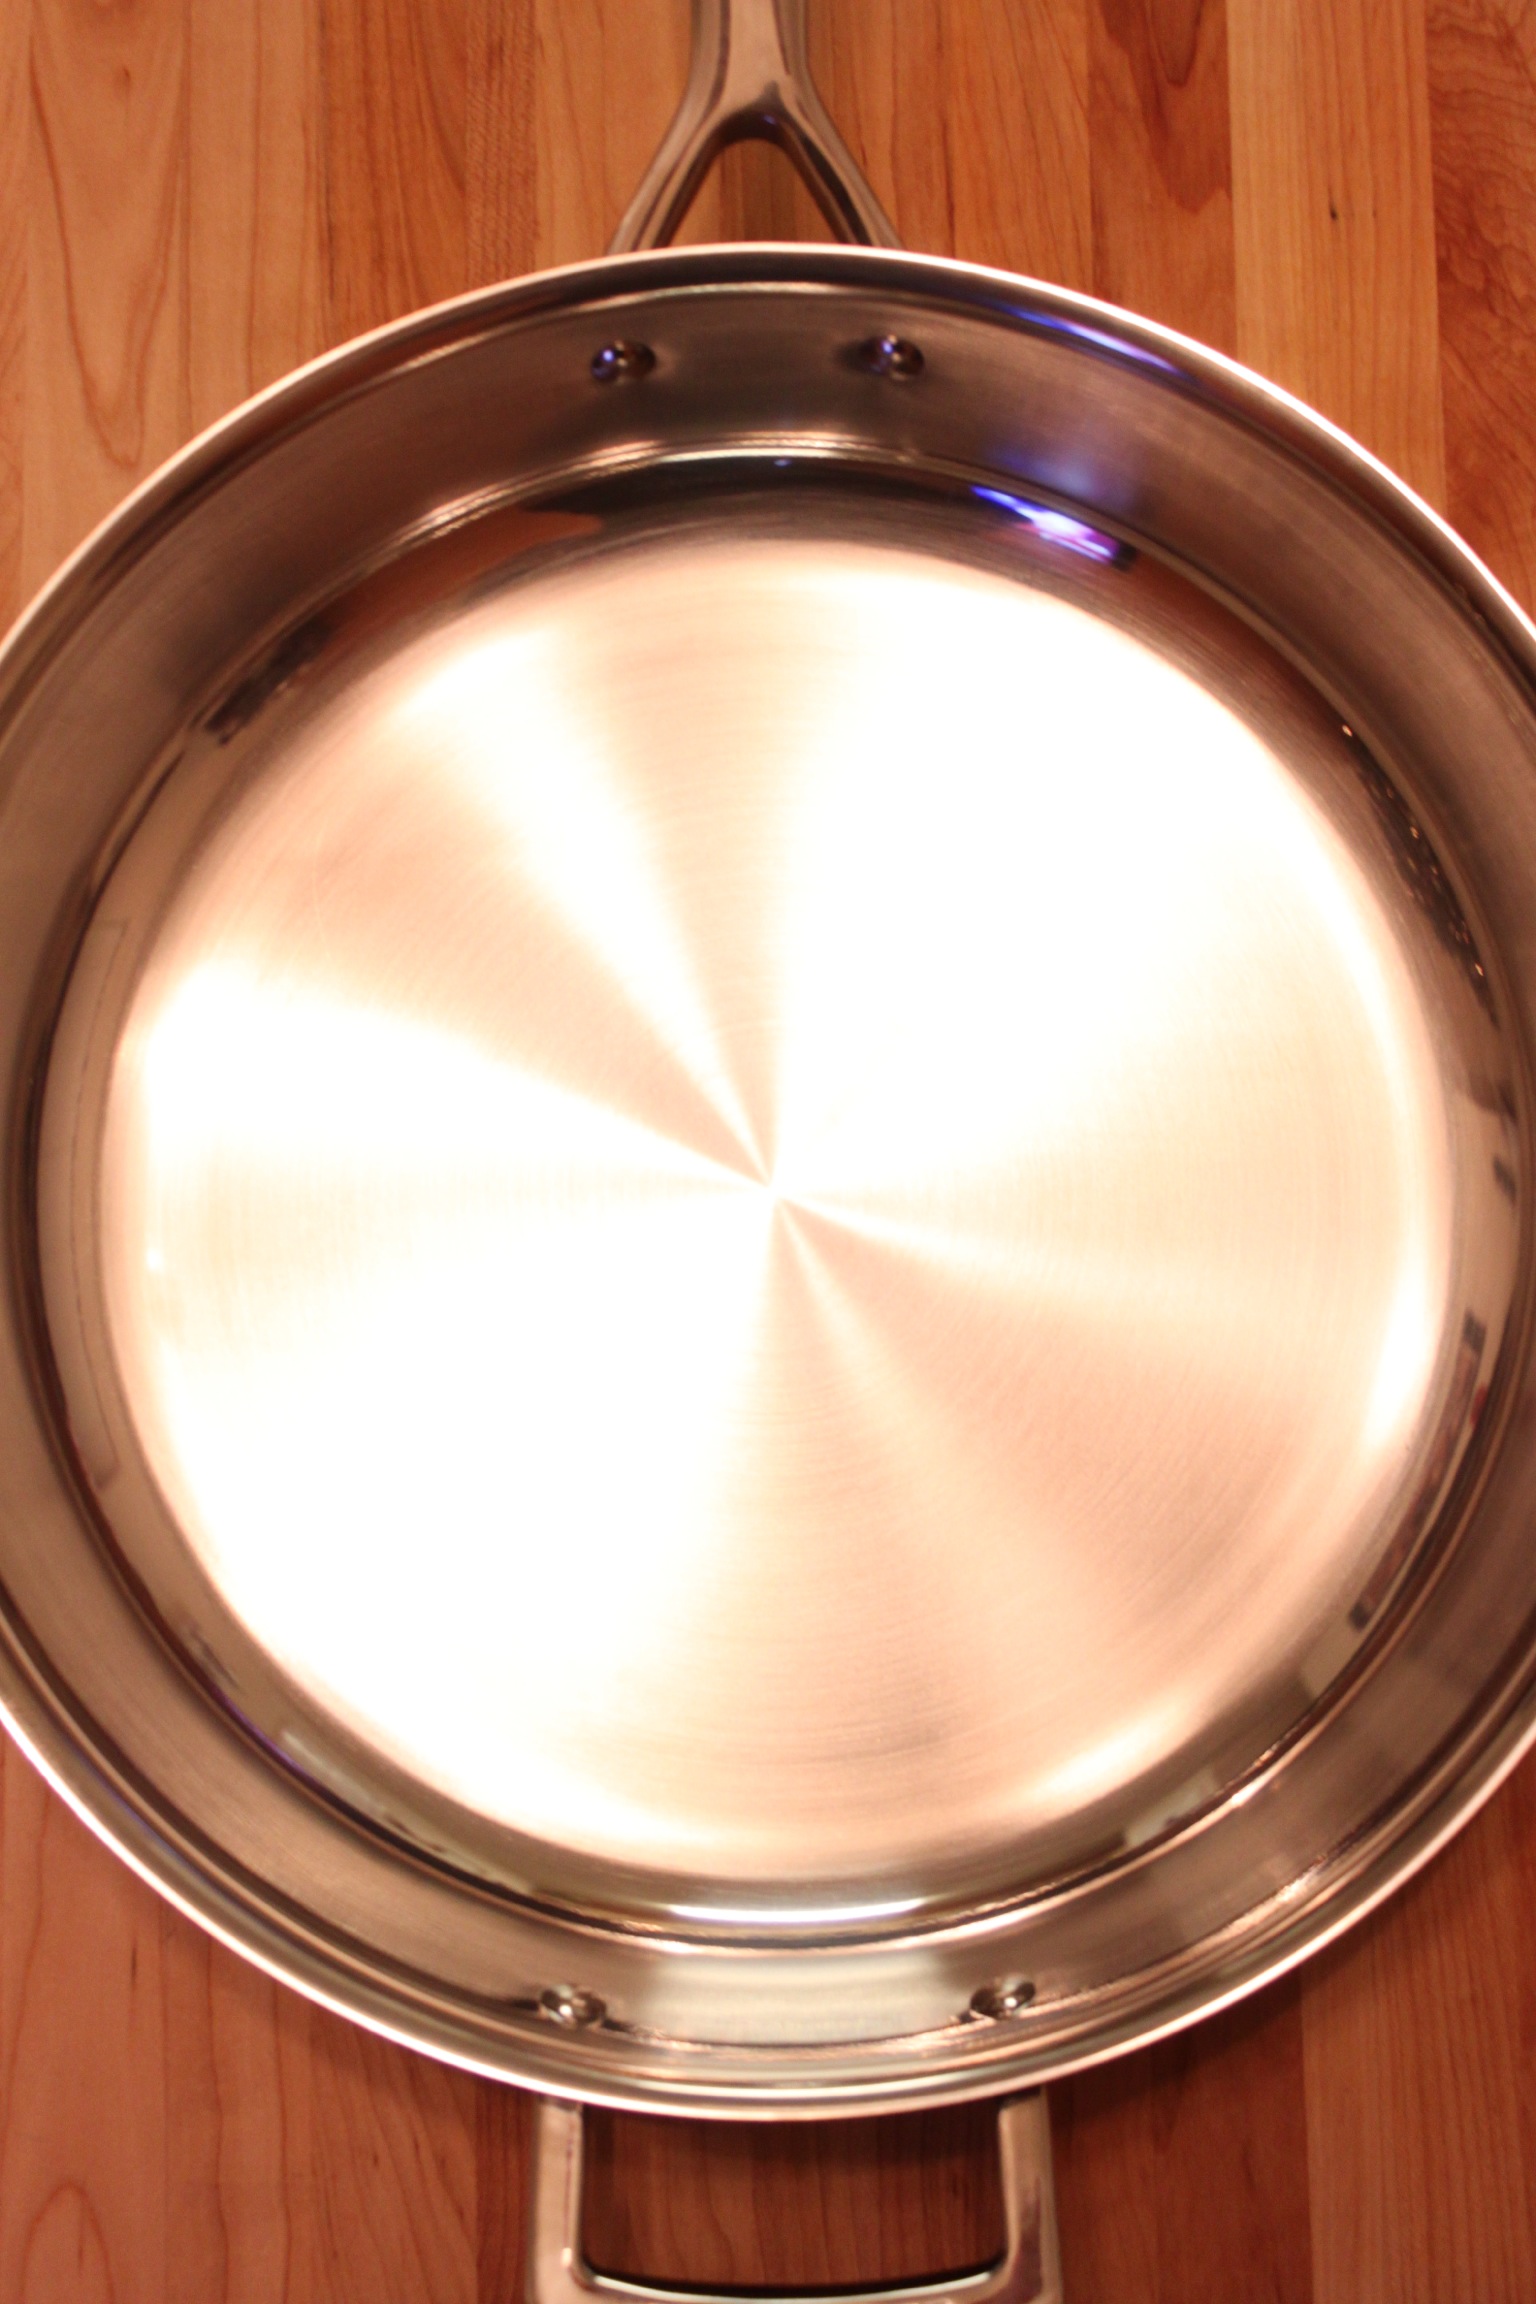 How to Keep Stainless Steel Cookware Shiny Forever?